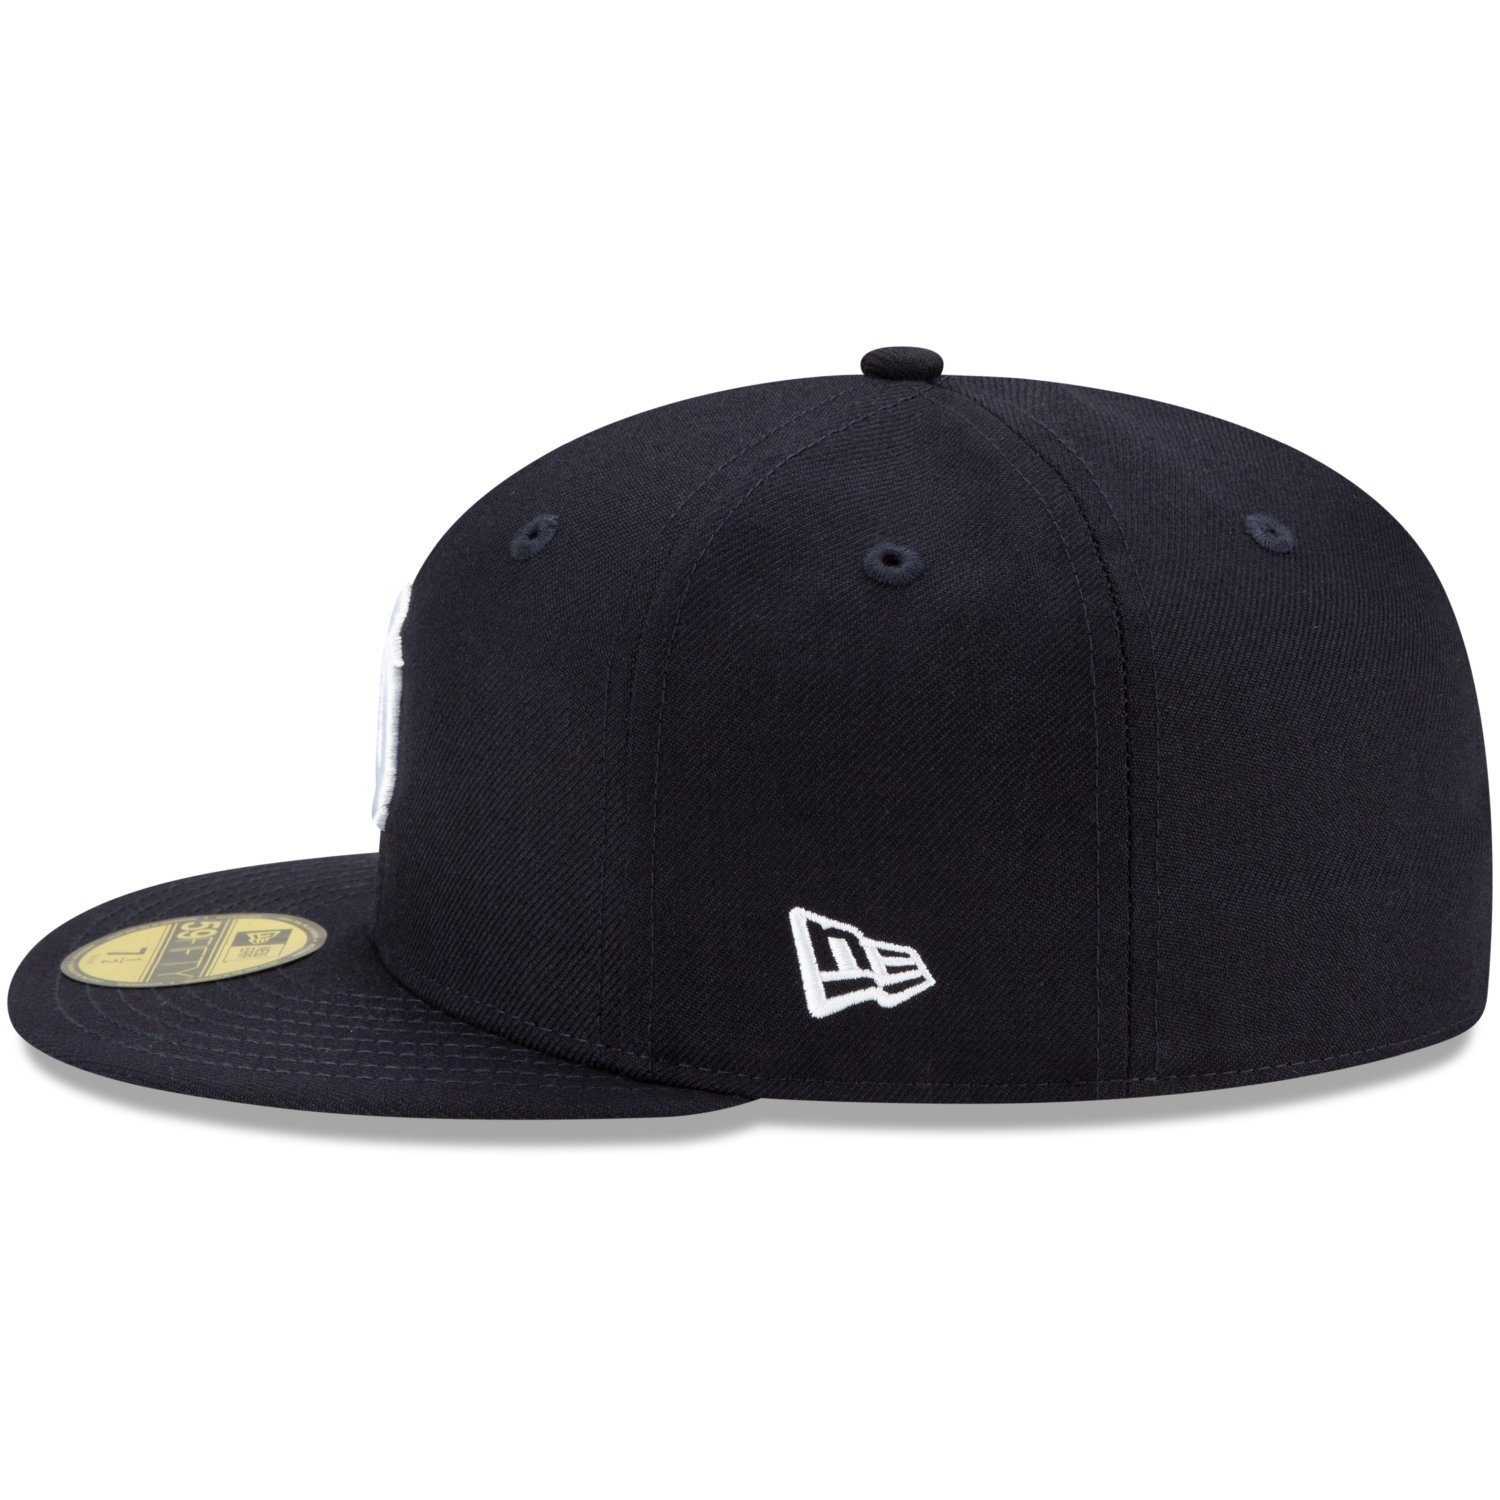 LIFESTYLE Yankees New York New Era 59Fifty Fitted Cap